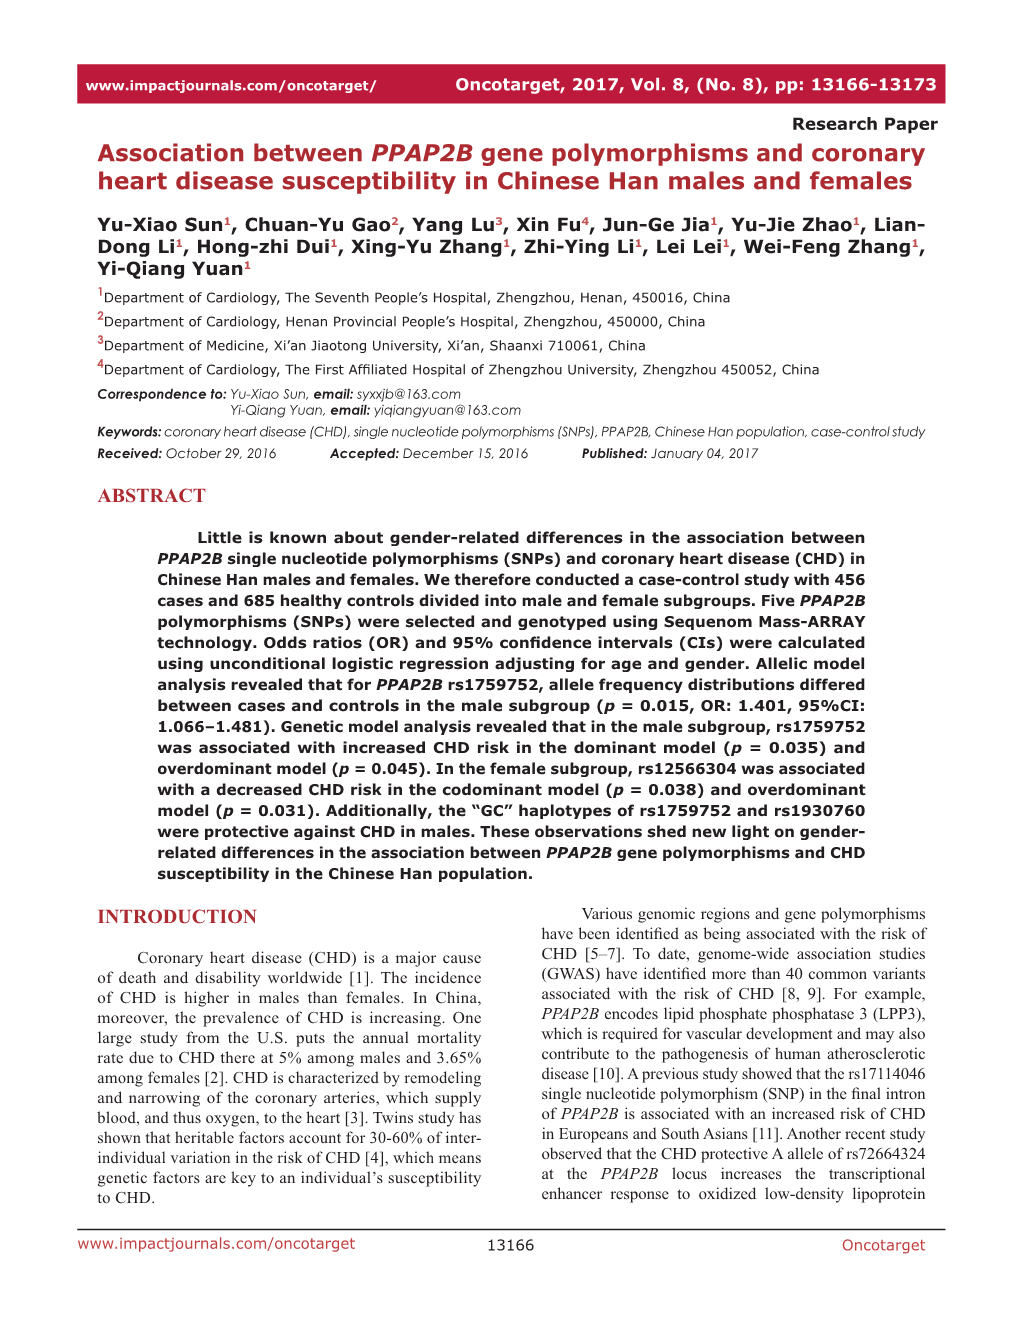 Association Between PPAP2B Gene Polymorphisms and Coronary Heart Disease Susceptibility in Chinese Han Males and Females